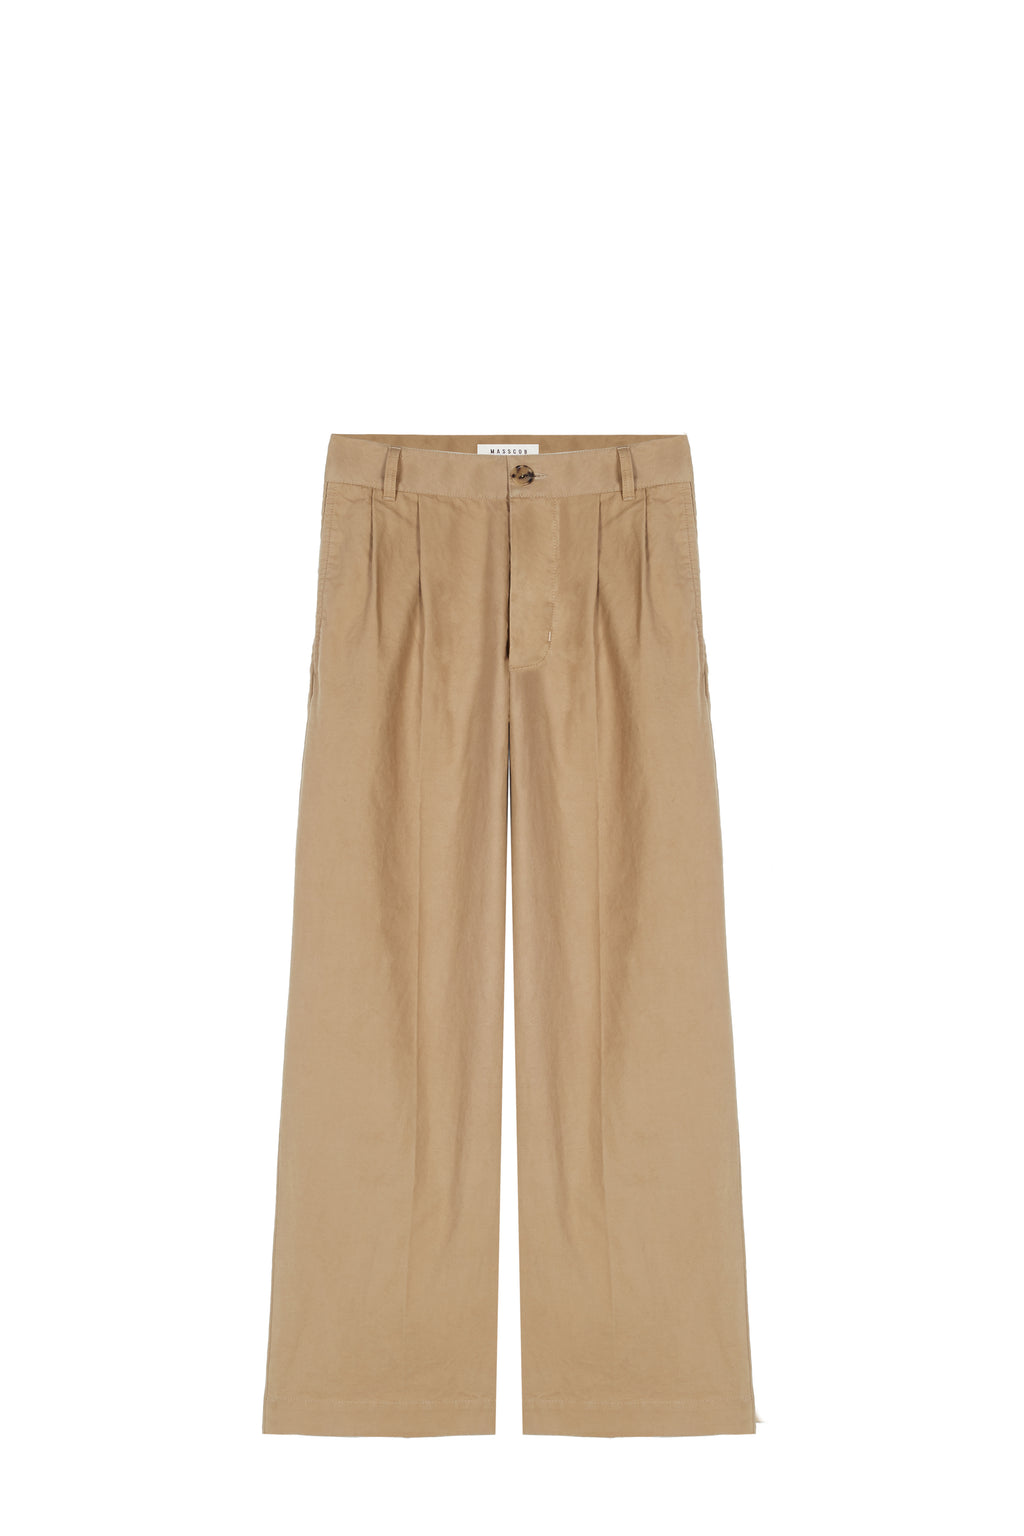 Mohave Pant